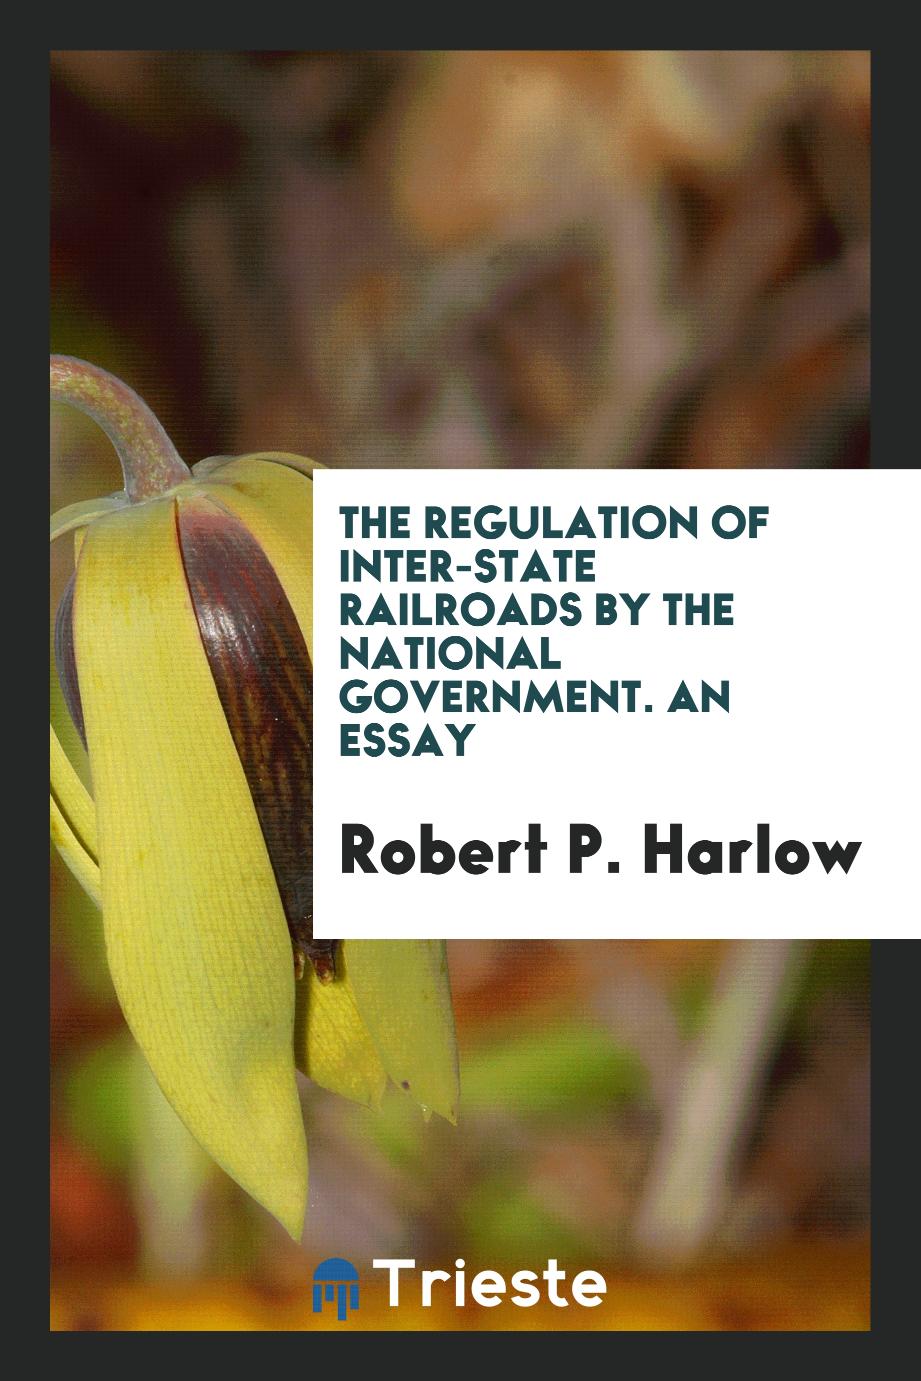 The Regulation of Inter-state Railroads by the National Government. An Essay